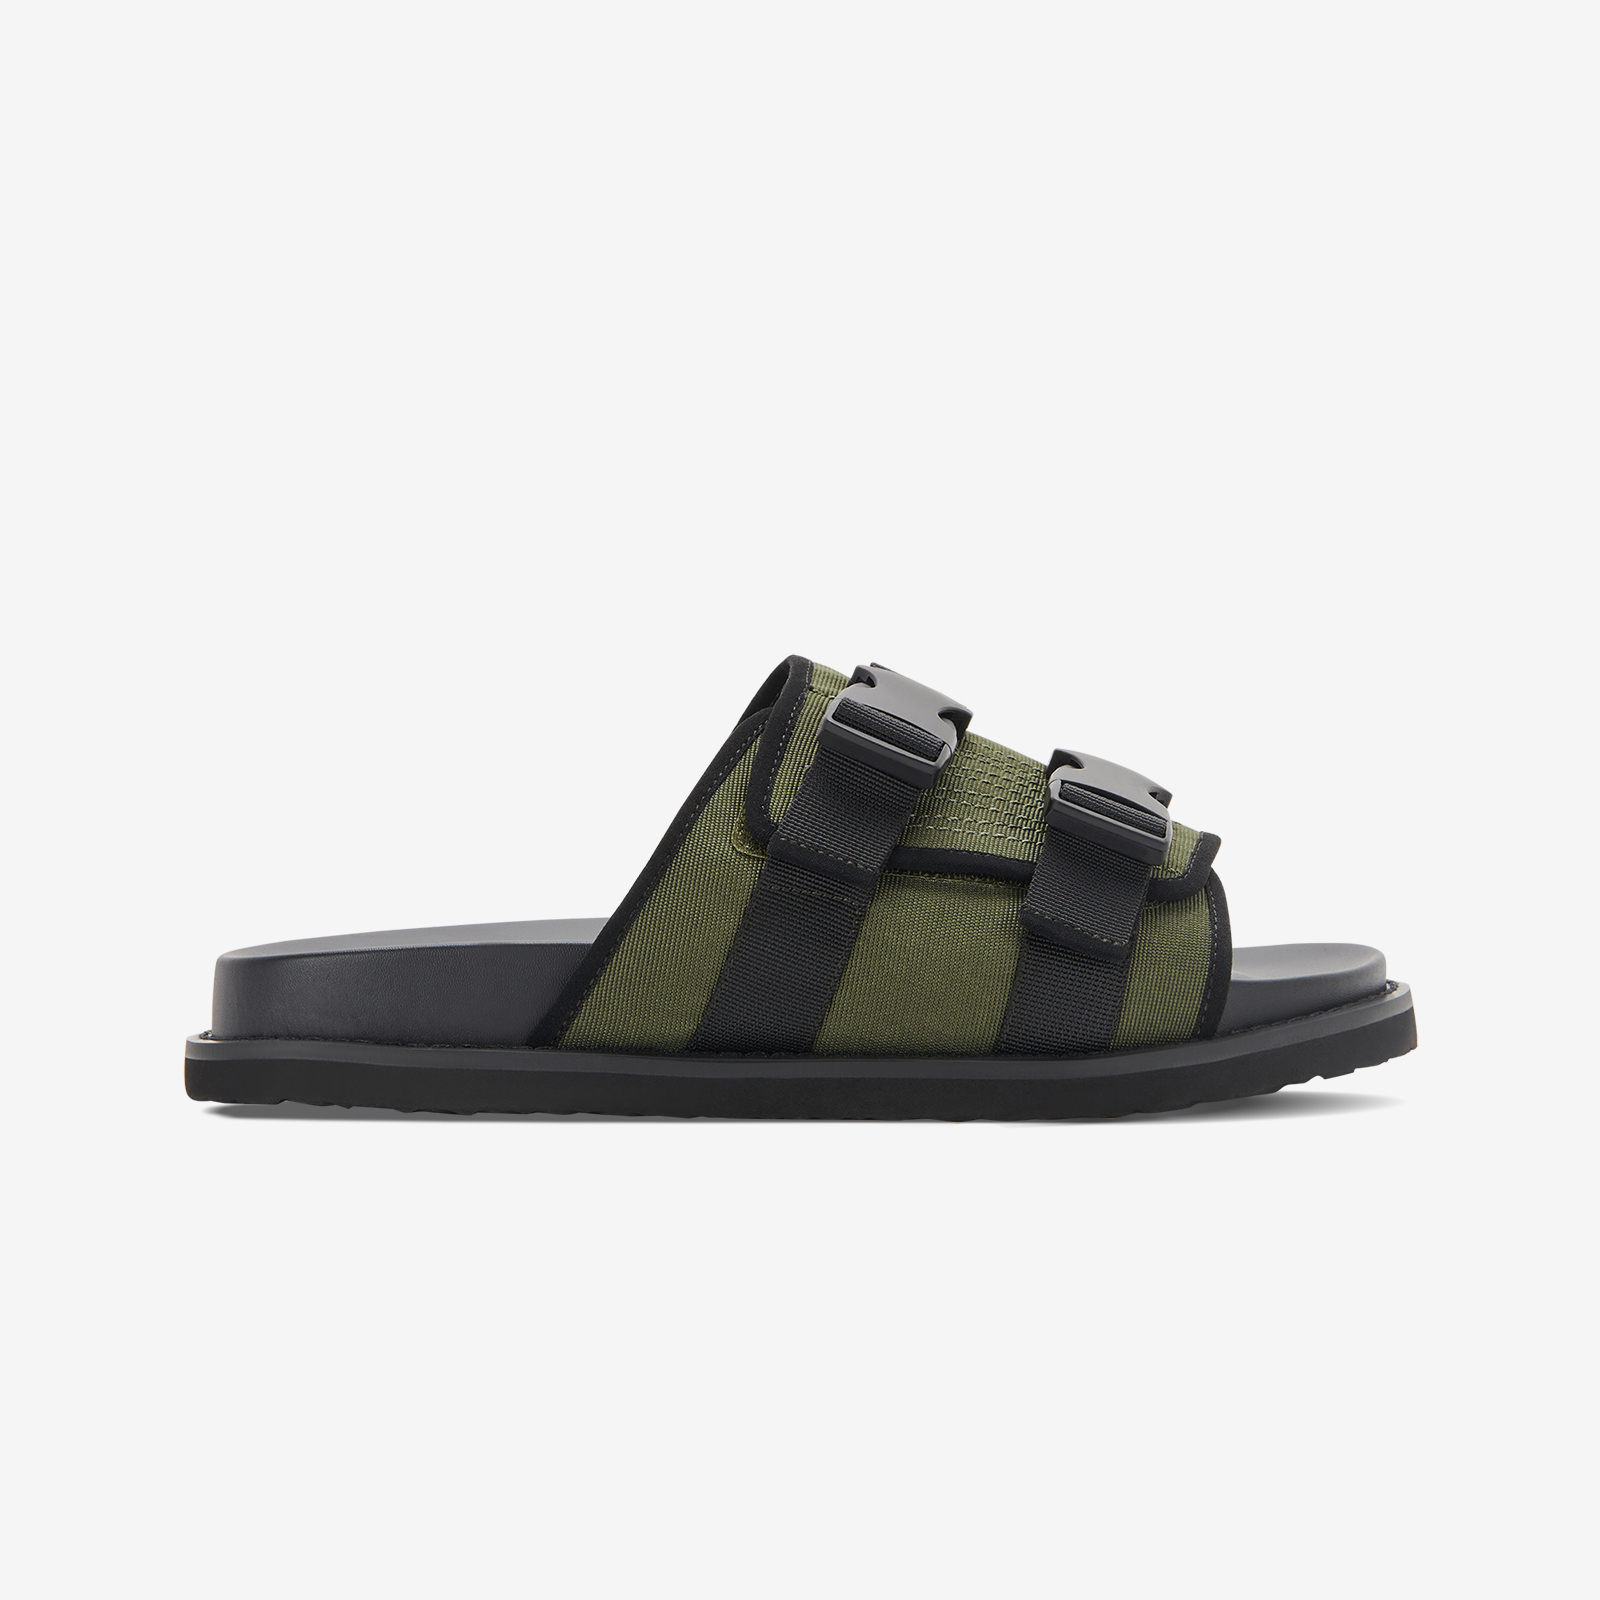 GREATS Just Dropped Comfy New Sandals & Slides Designed For Chilling ...